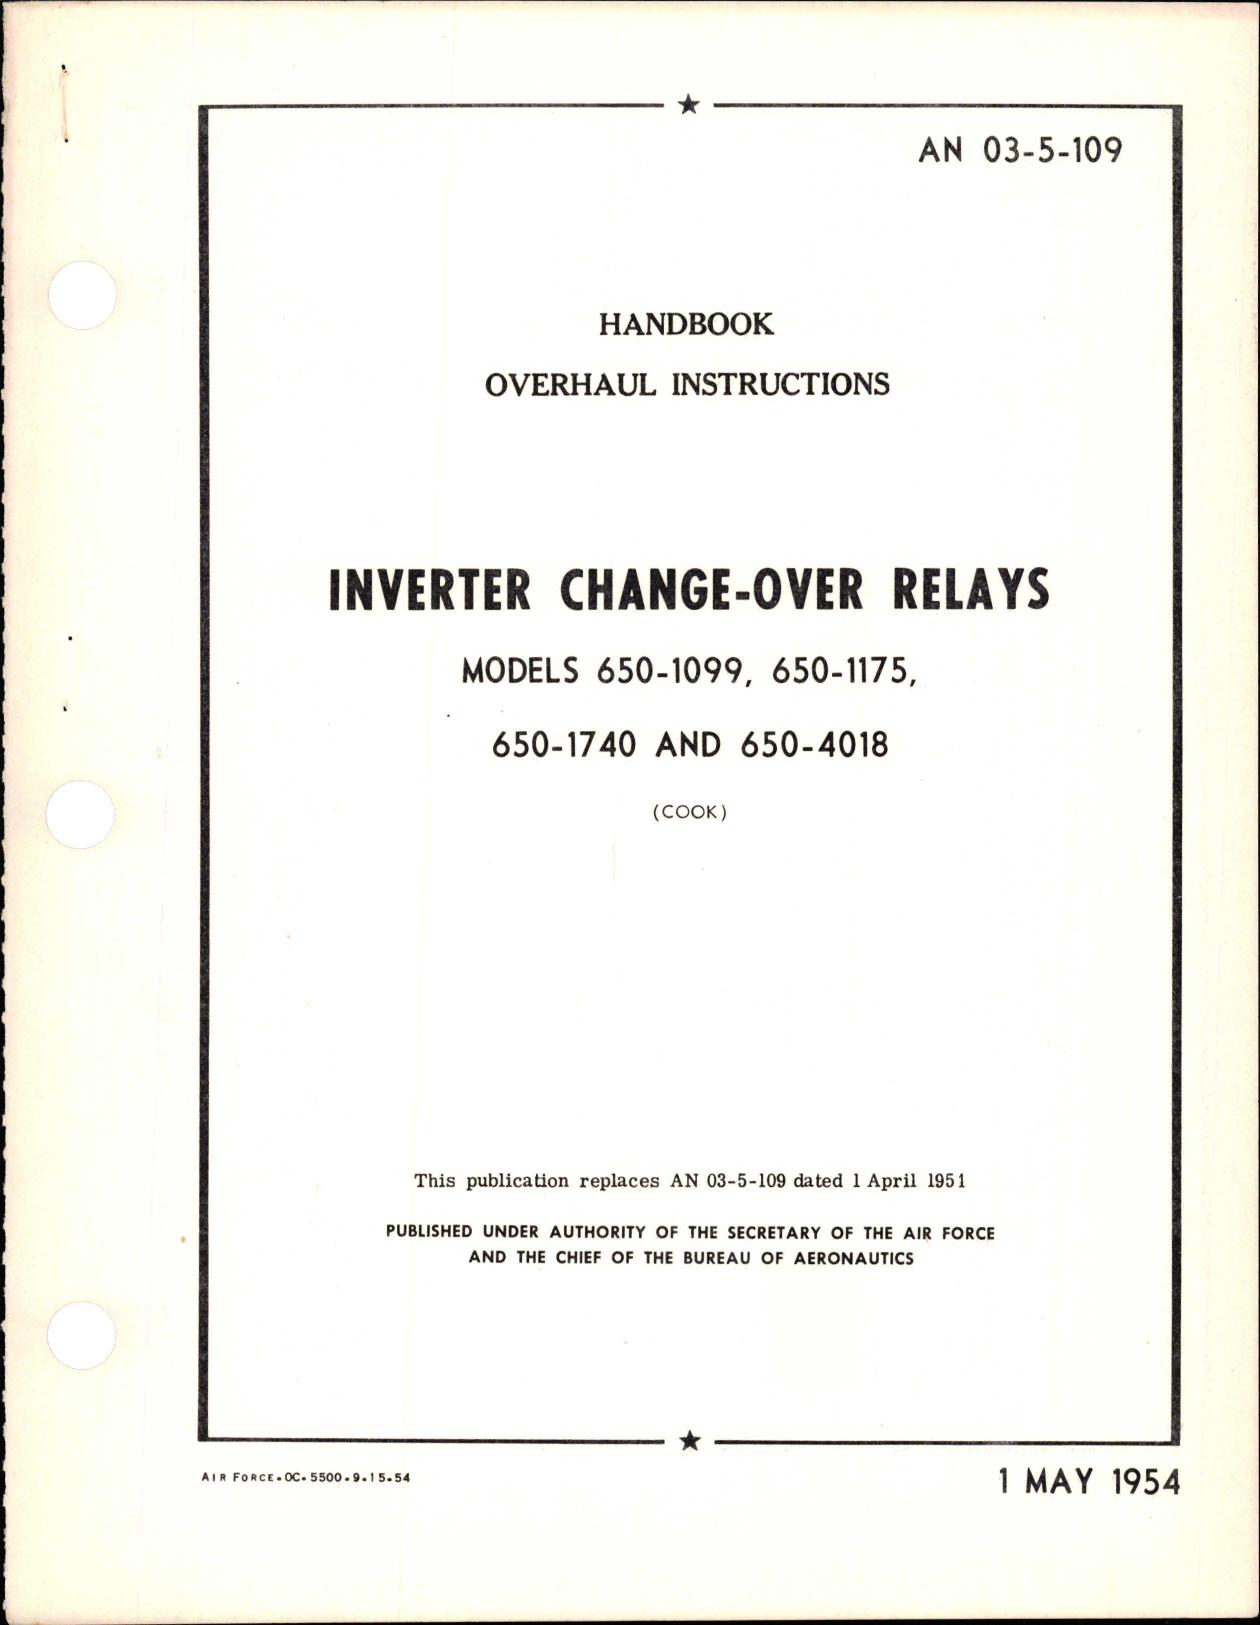 Sample page 1 from AirCorps Library document: Overhaul Instructions for Inverter Change-Over Relays - Models 650-1099, 650-1175, 650-1740, and 650-4018 